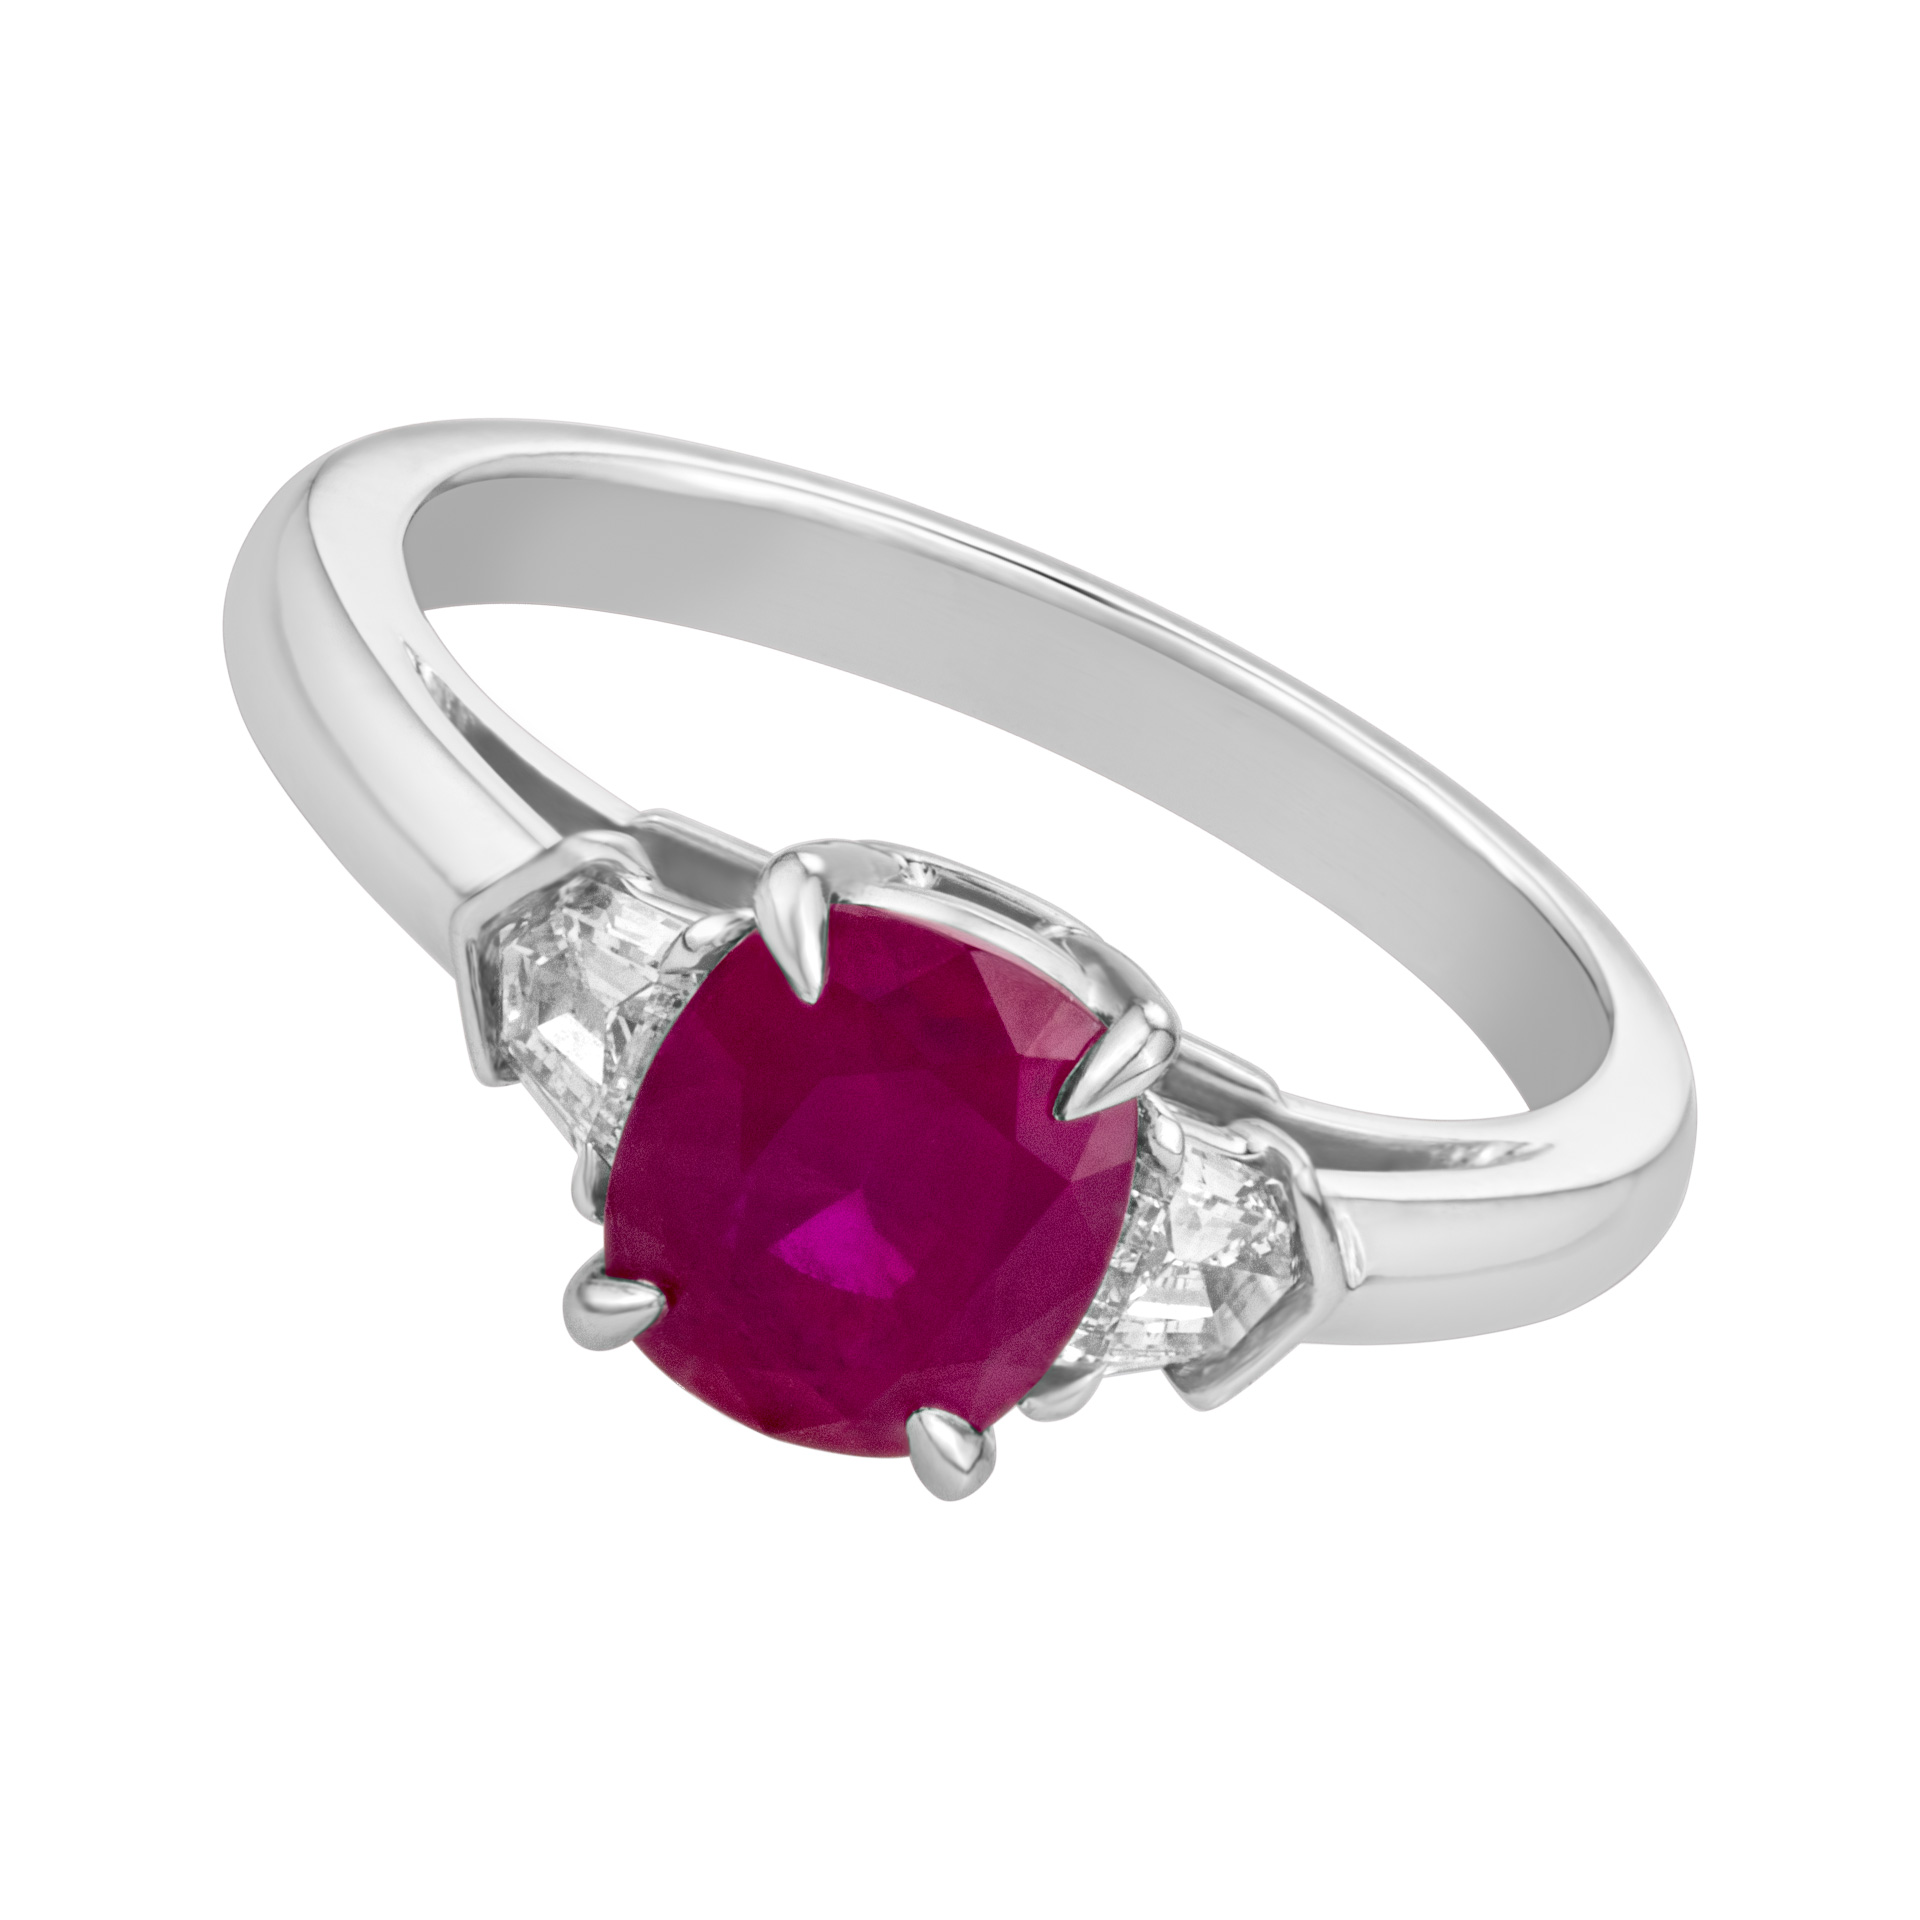 Burma Ruby with bullet cut diamonds set in Platinum ring image 1